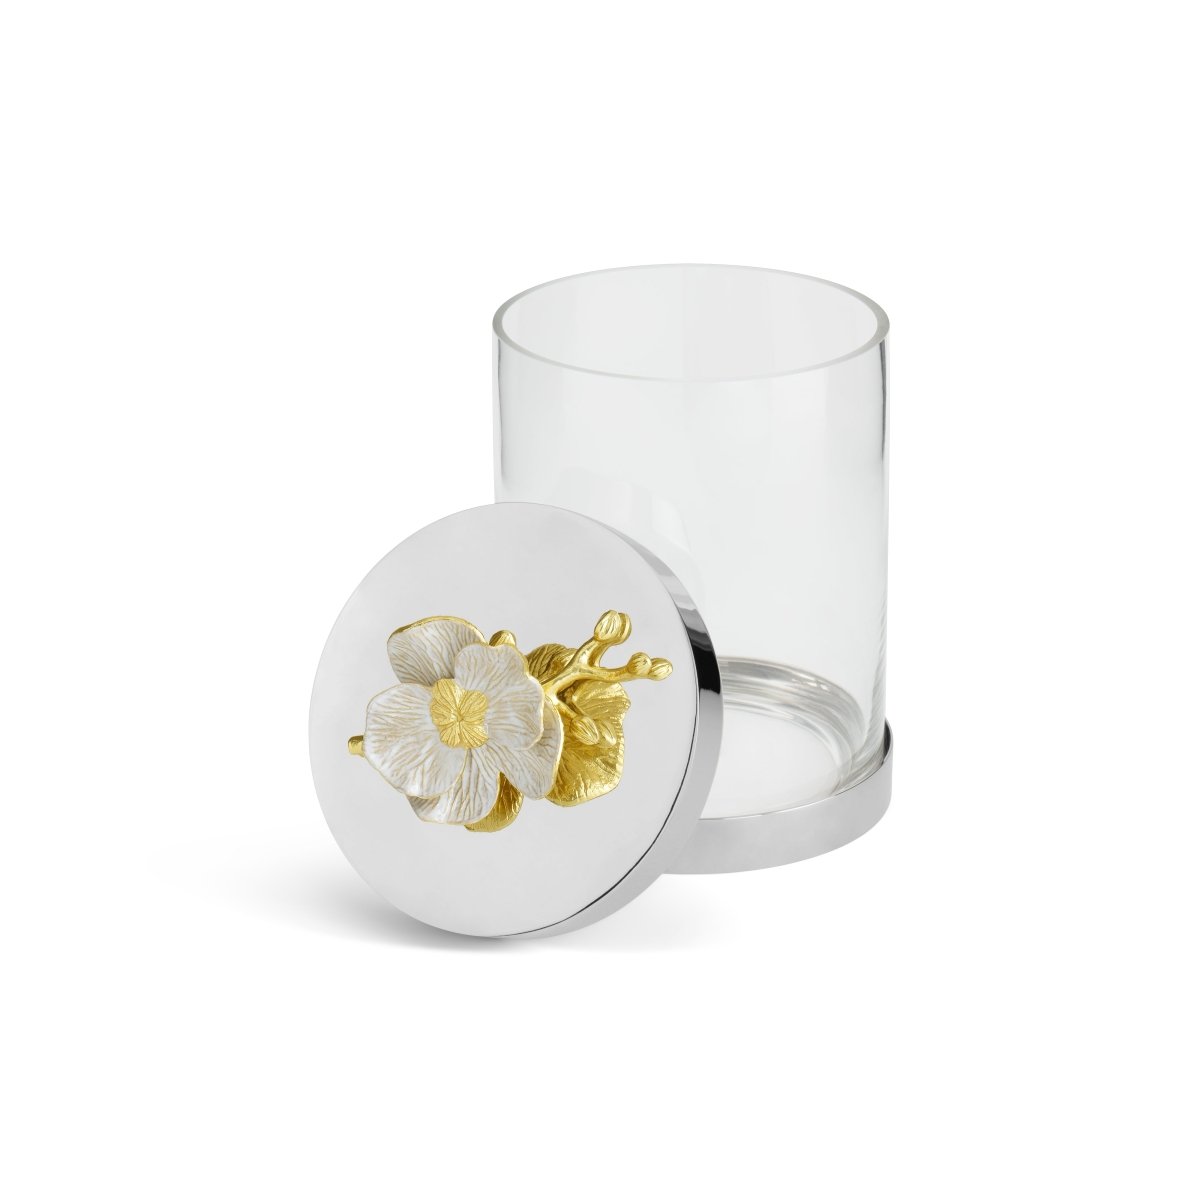 Michael Aram Orchid Canisters